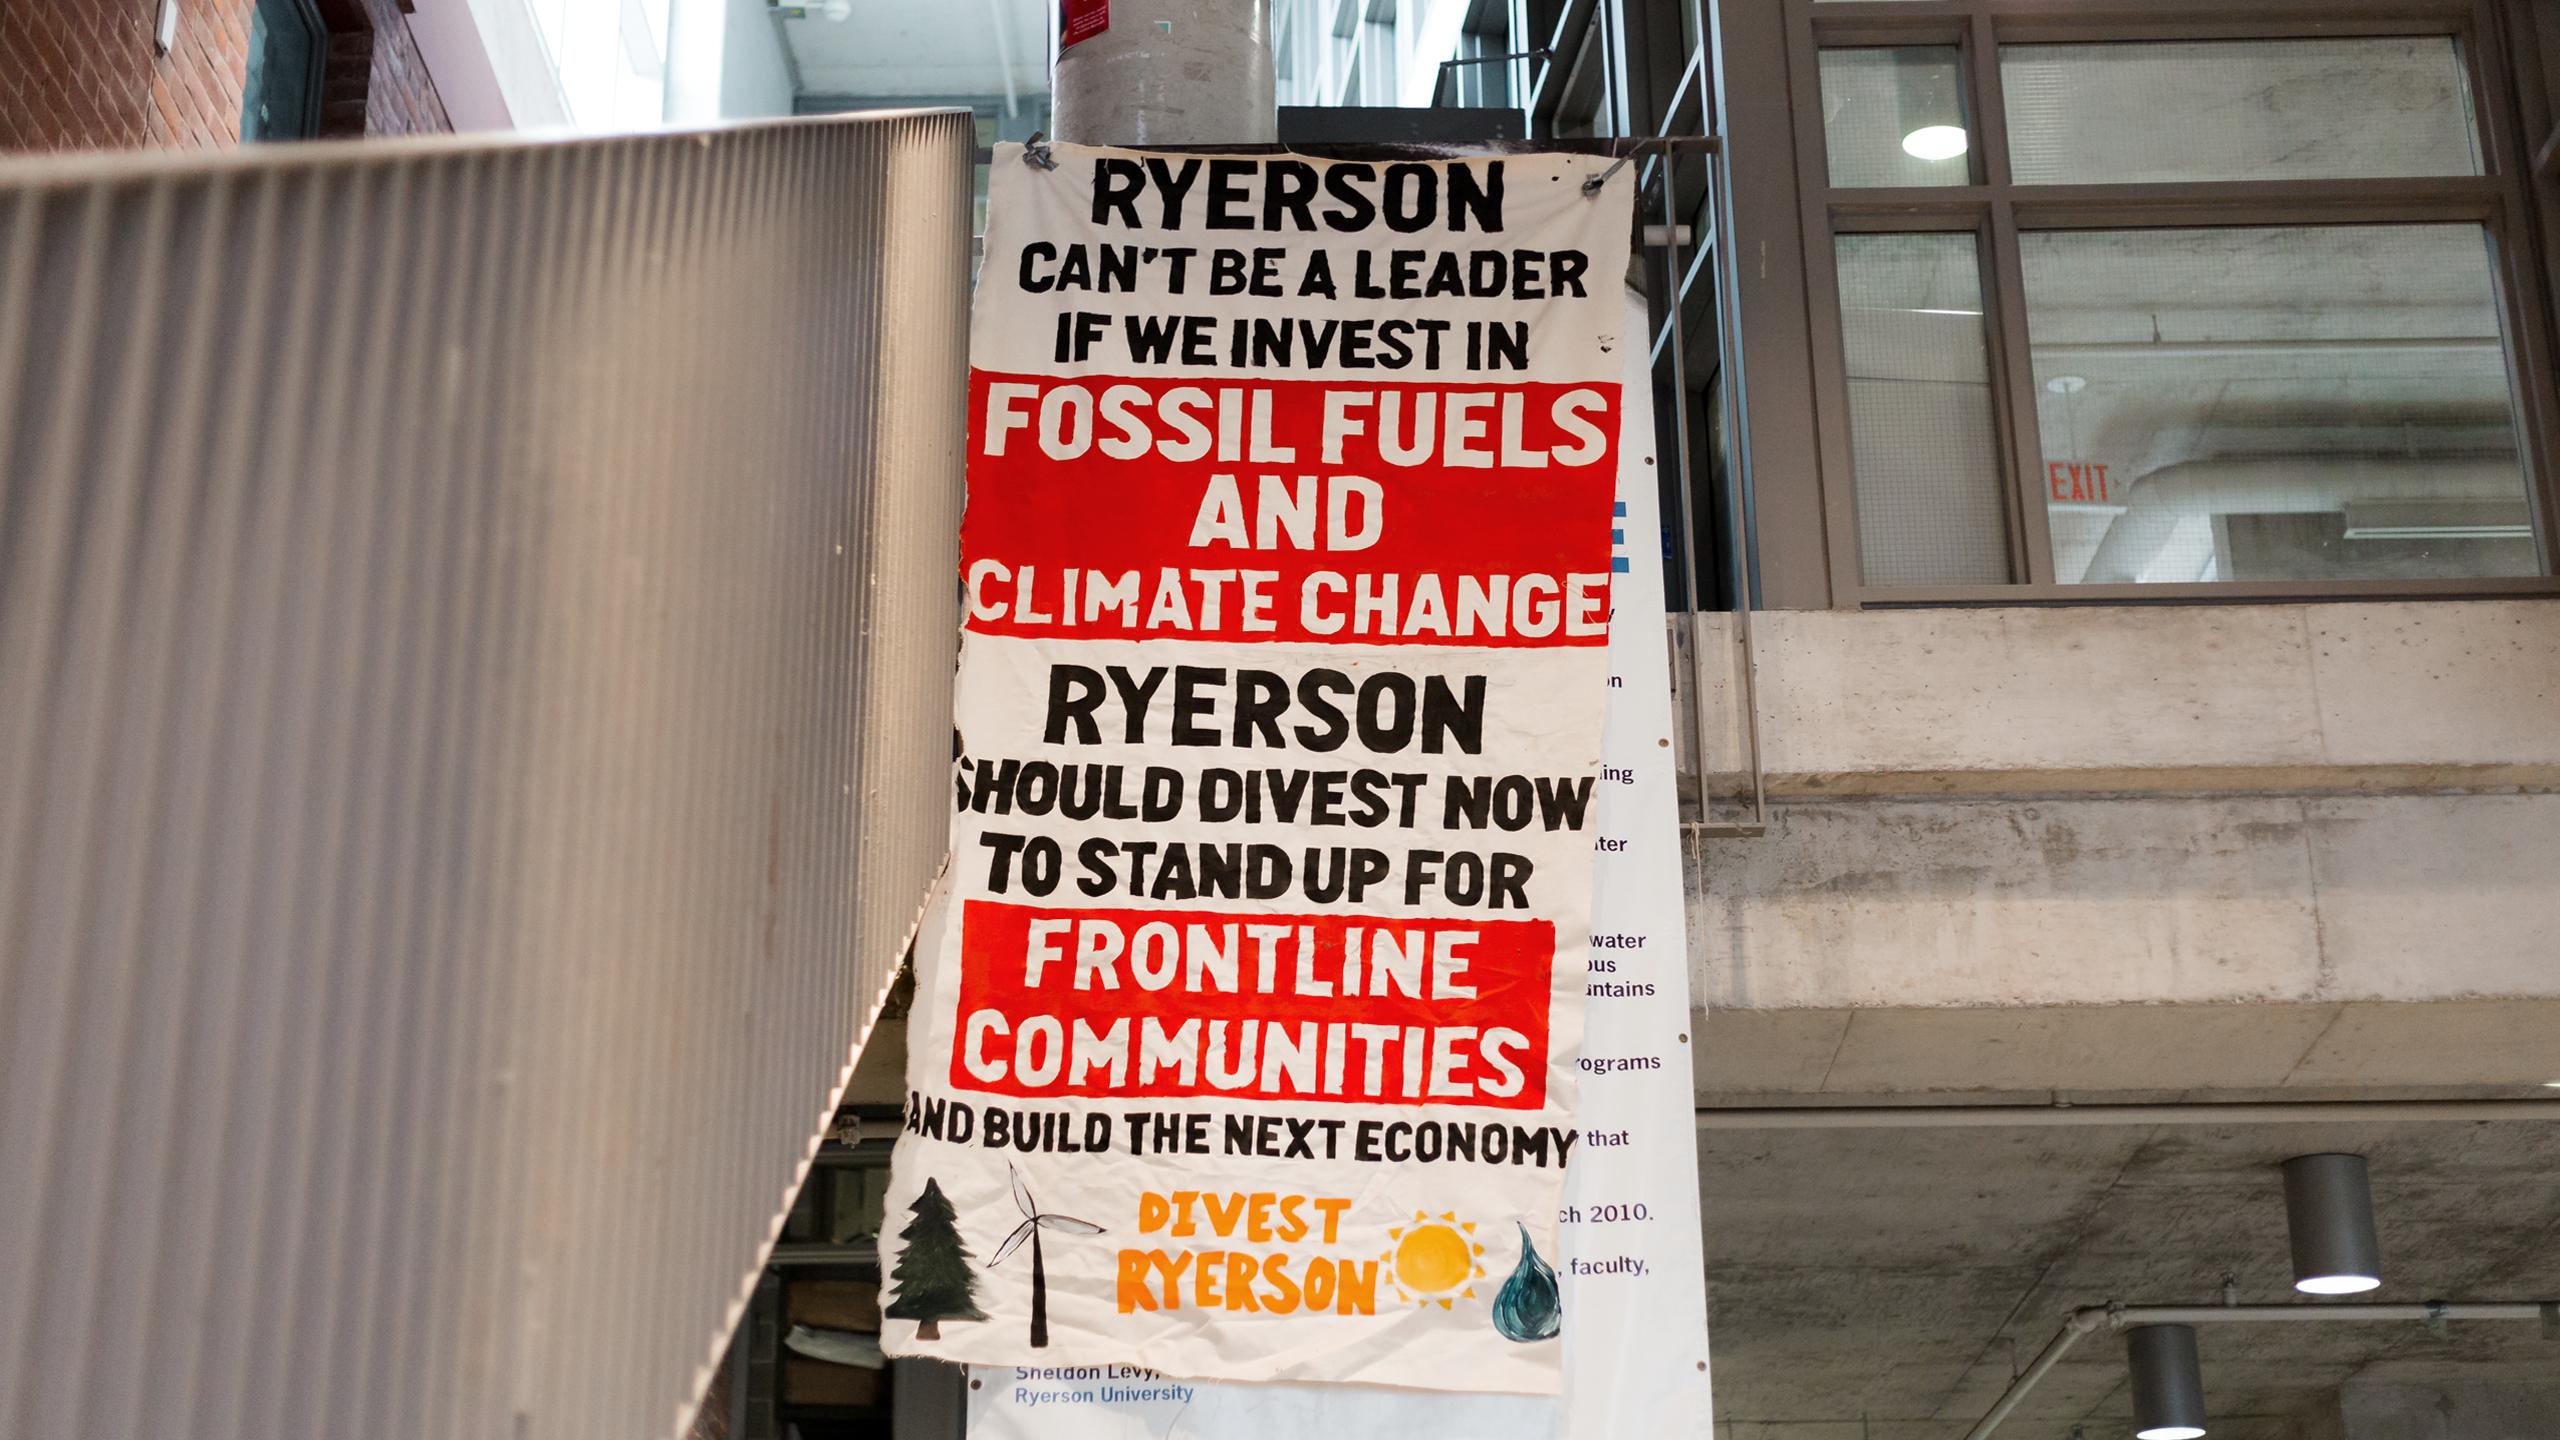 A painted banner that says Ryerson should divest